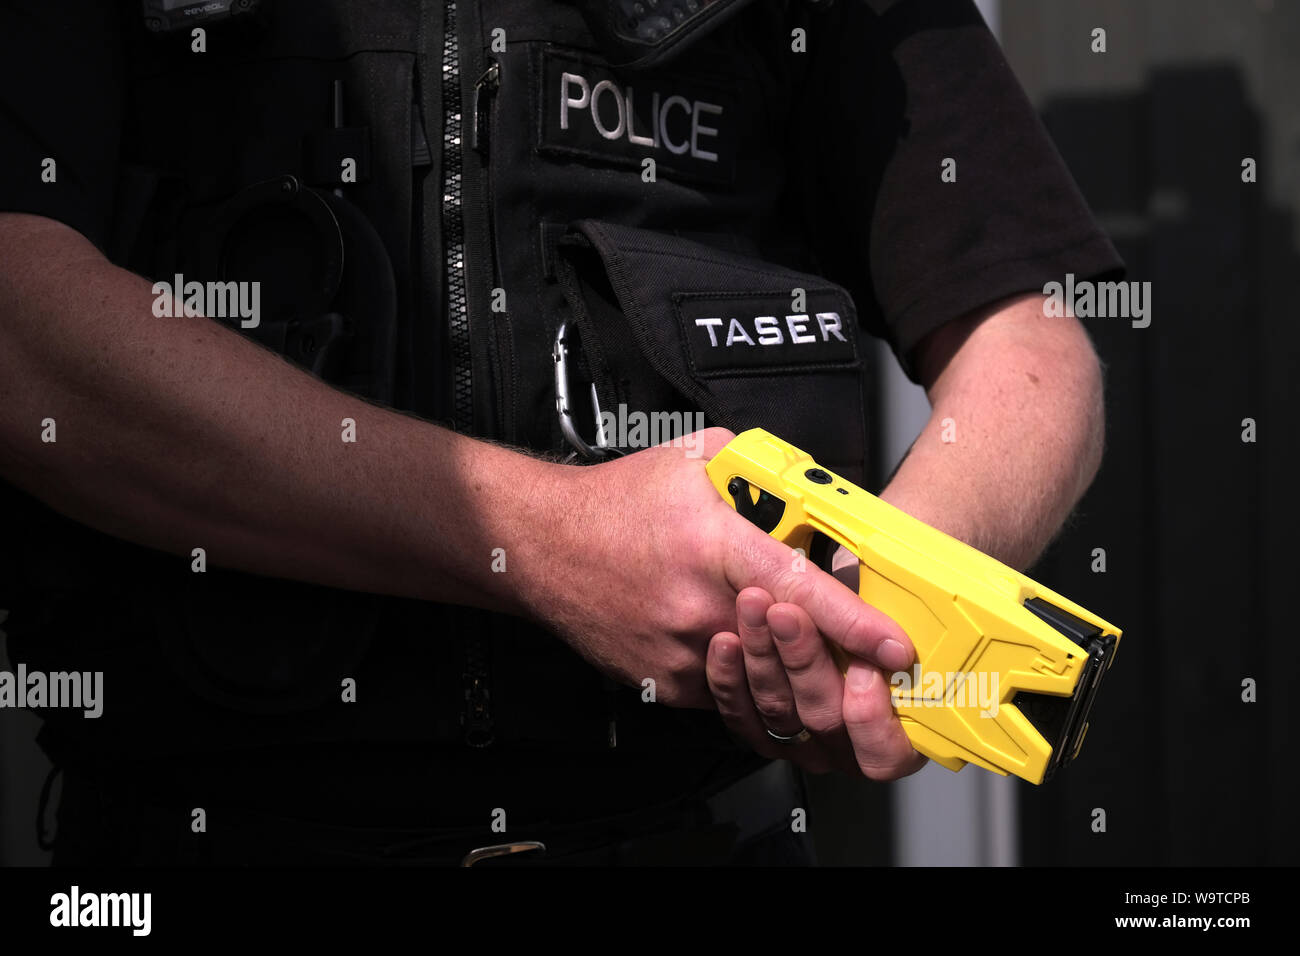 A British police officer holding a axon taser X2 conducted electrical weapon or stun gun. The taser is routinely issued to police forces across the uk Stock Photo